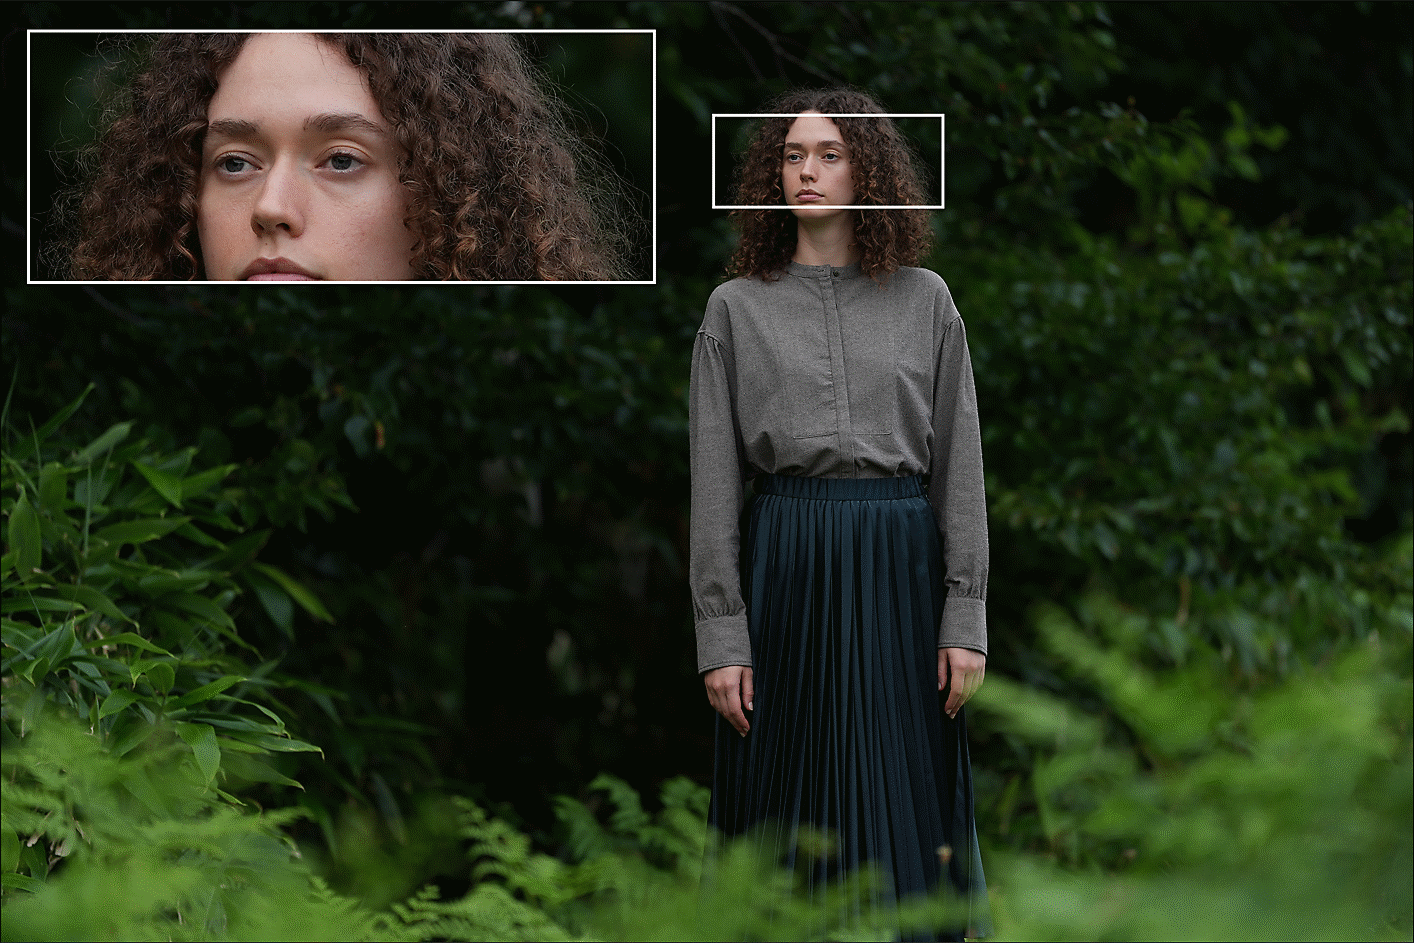 Image of a woman standing in the woods and a close-up image of her face